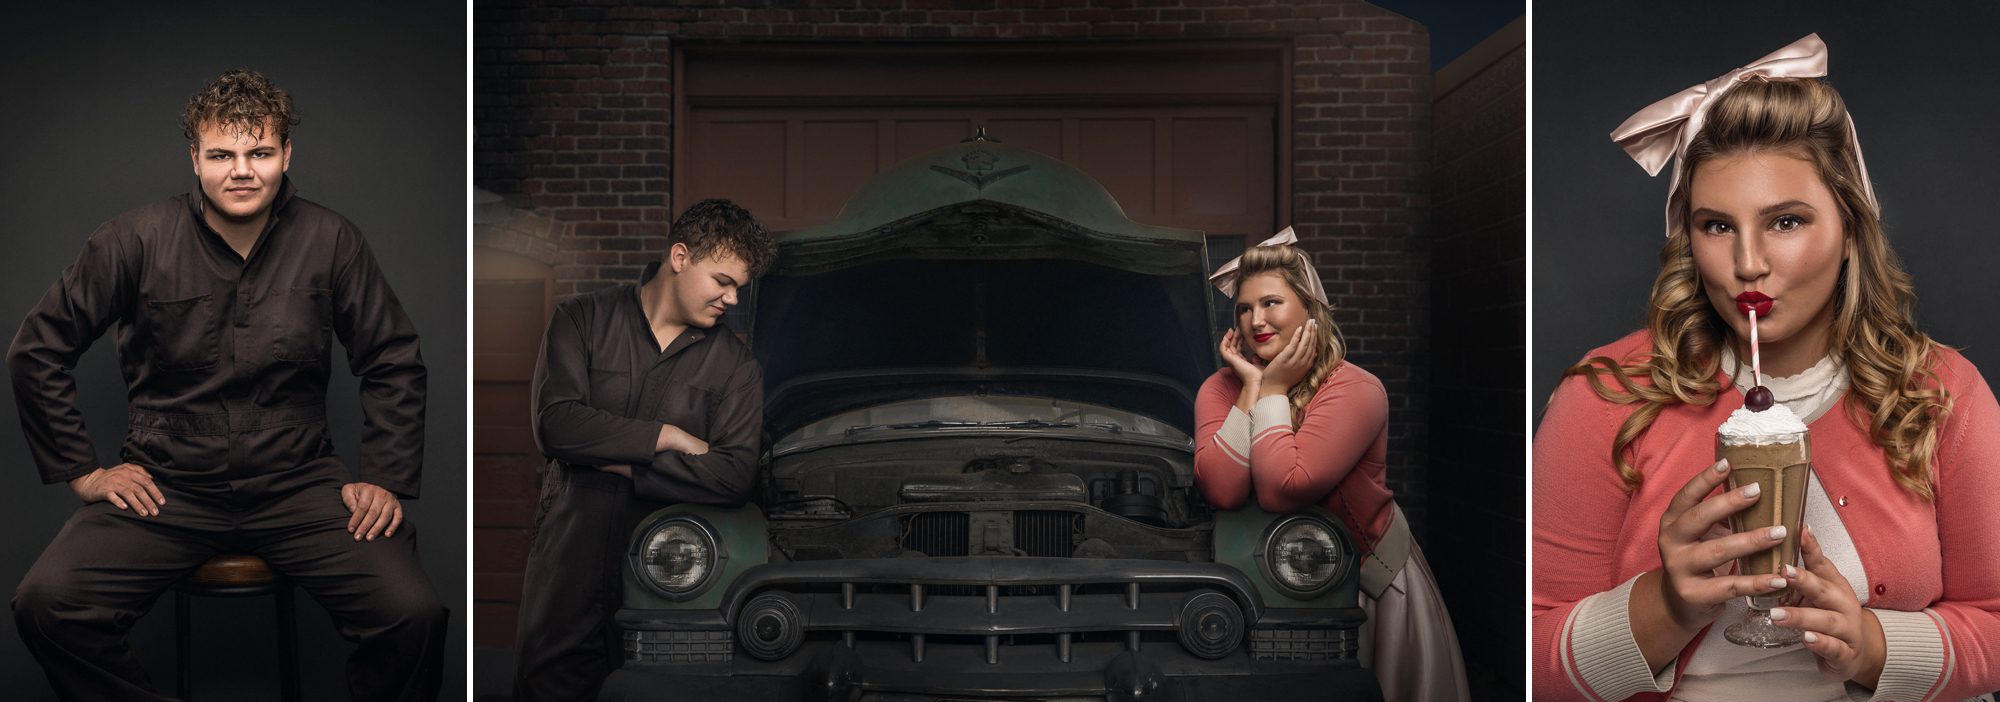 1950s girl and boy with car creative portrait